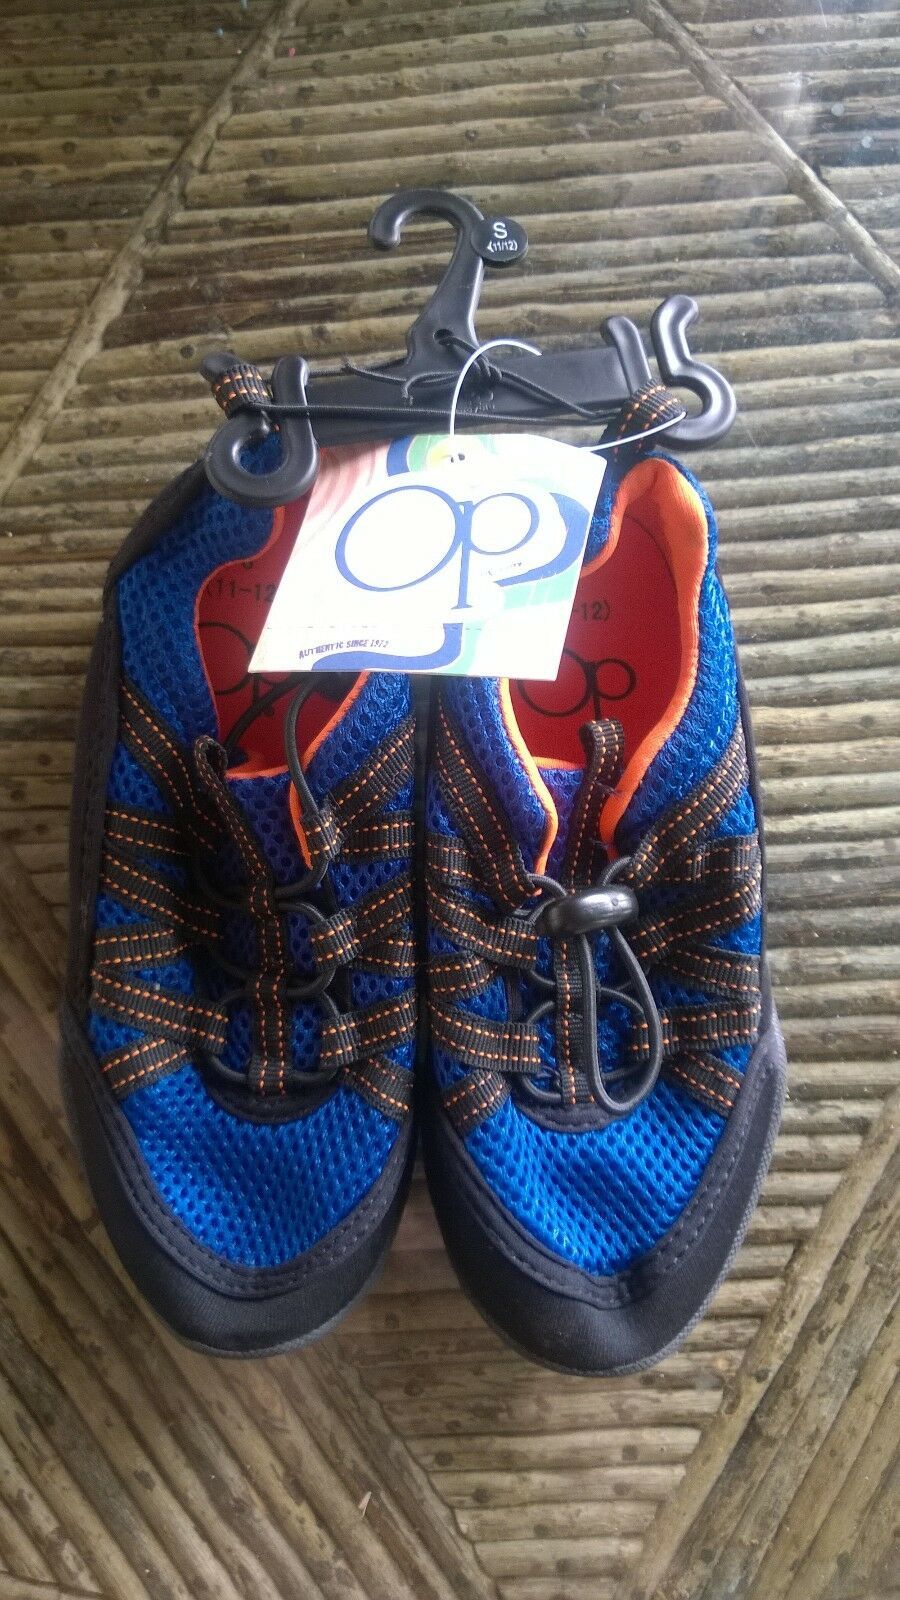 Primary image for Youth OP Black/Blue/Orange Water Shoes Aqua Socks for beach, lake or swimming